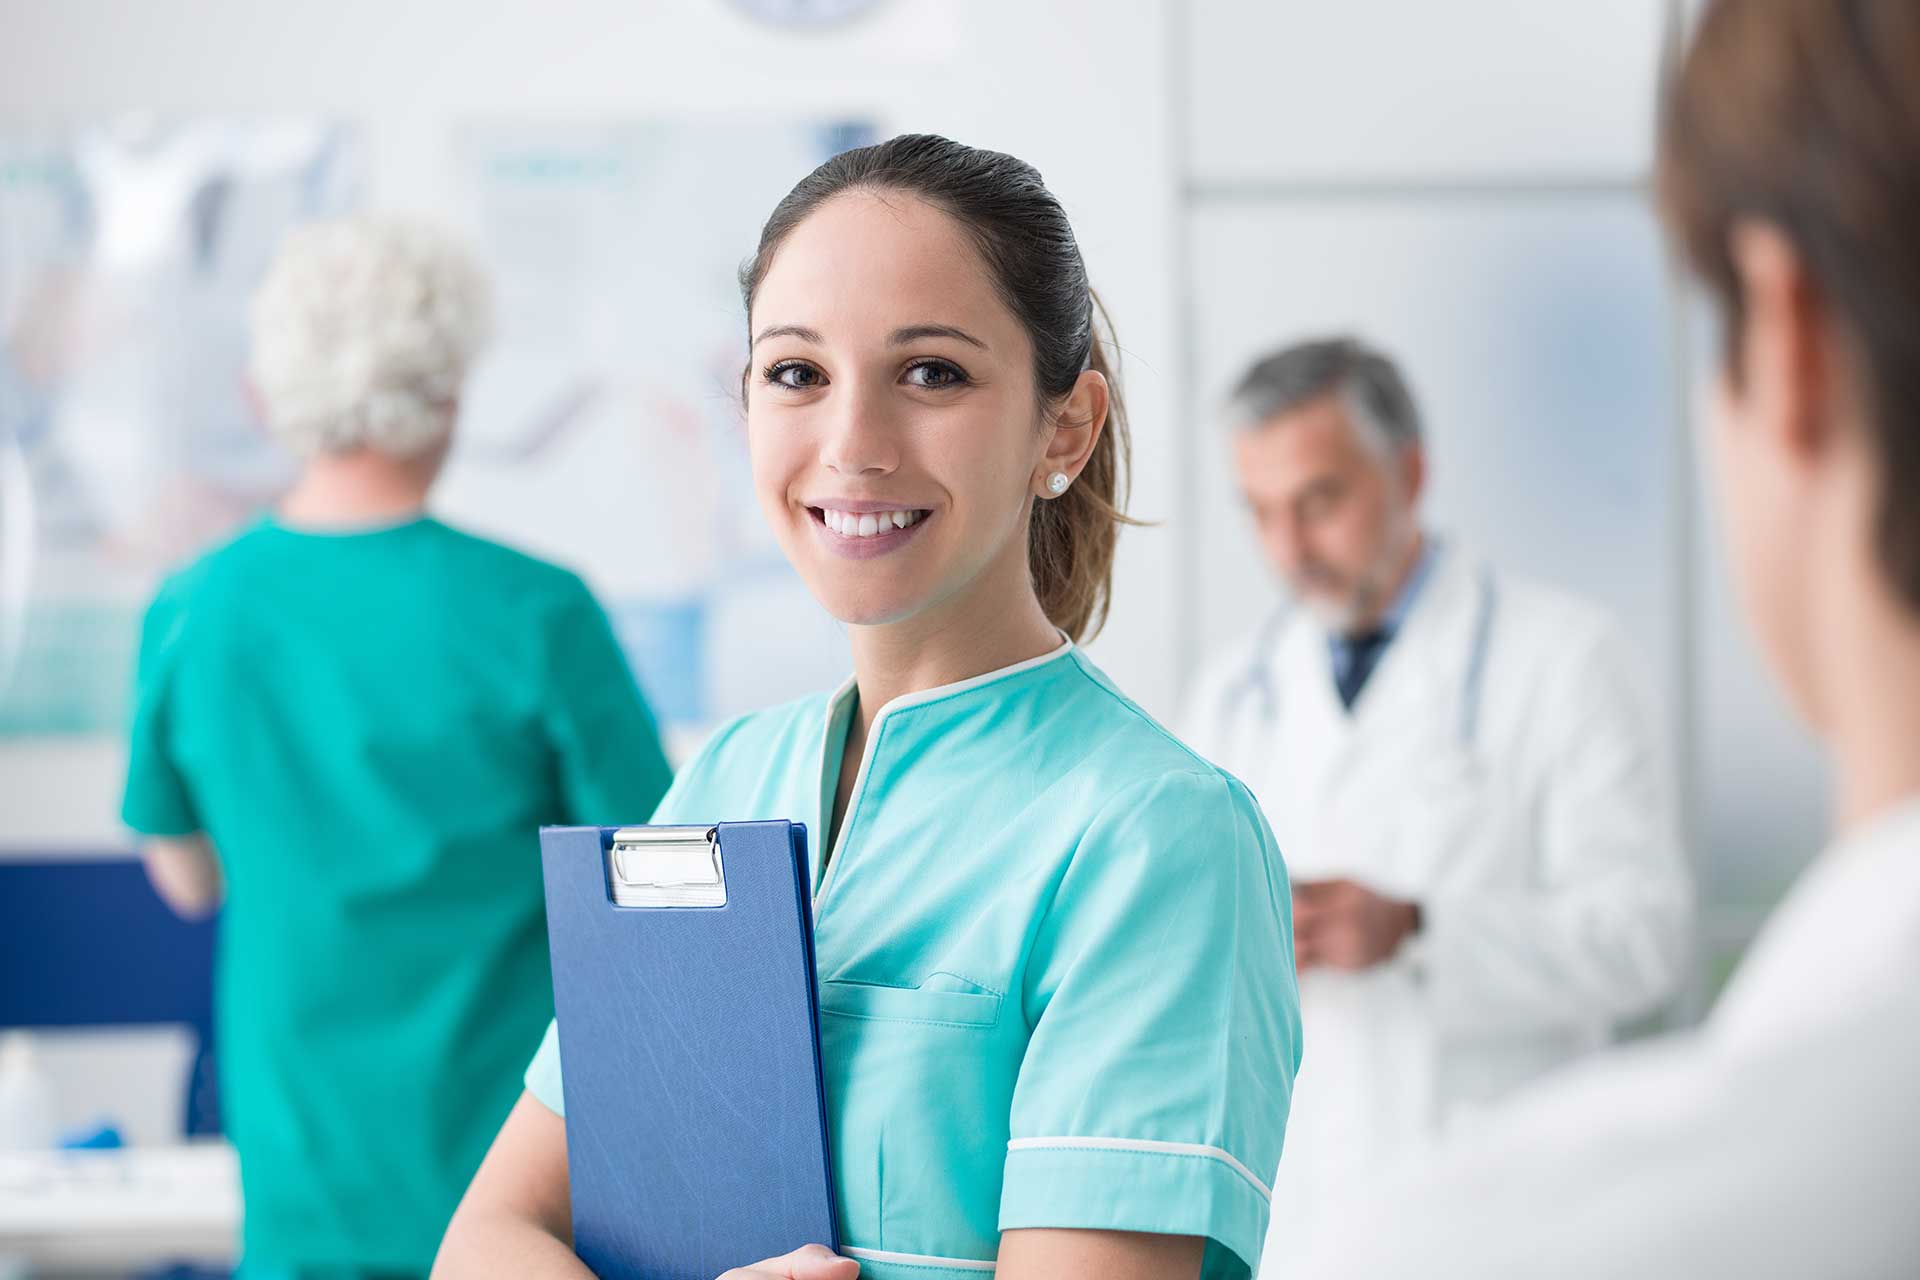 Nurse holding file to her chest and looking at camera in blurred background of hospital setting